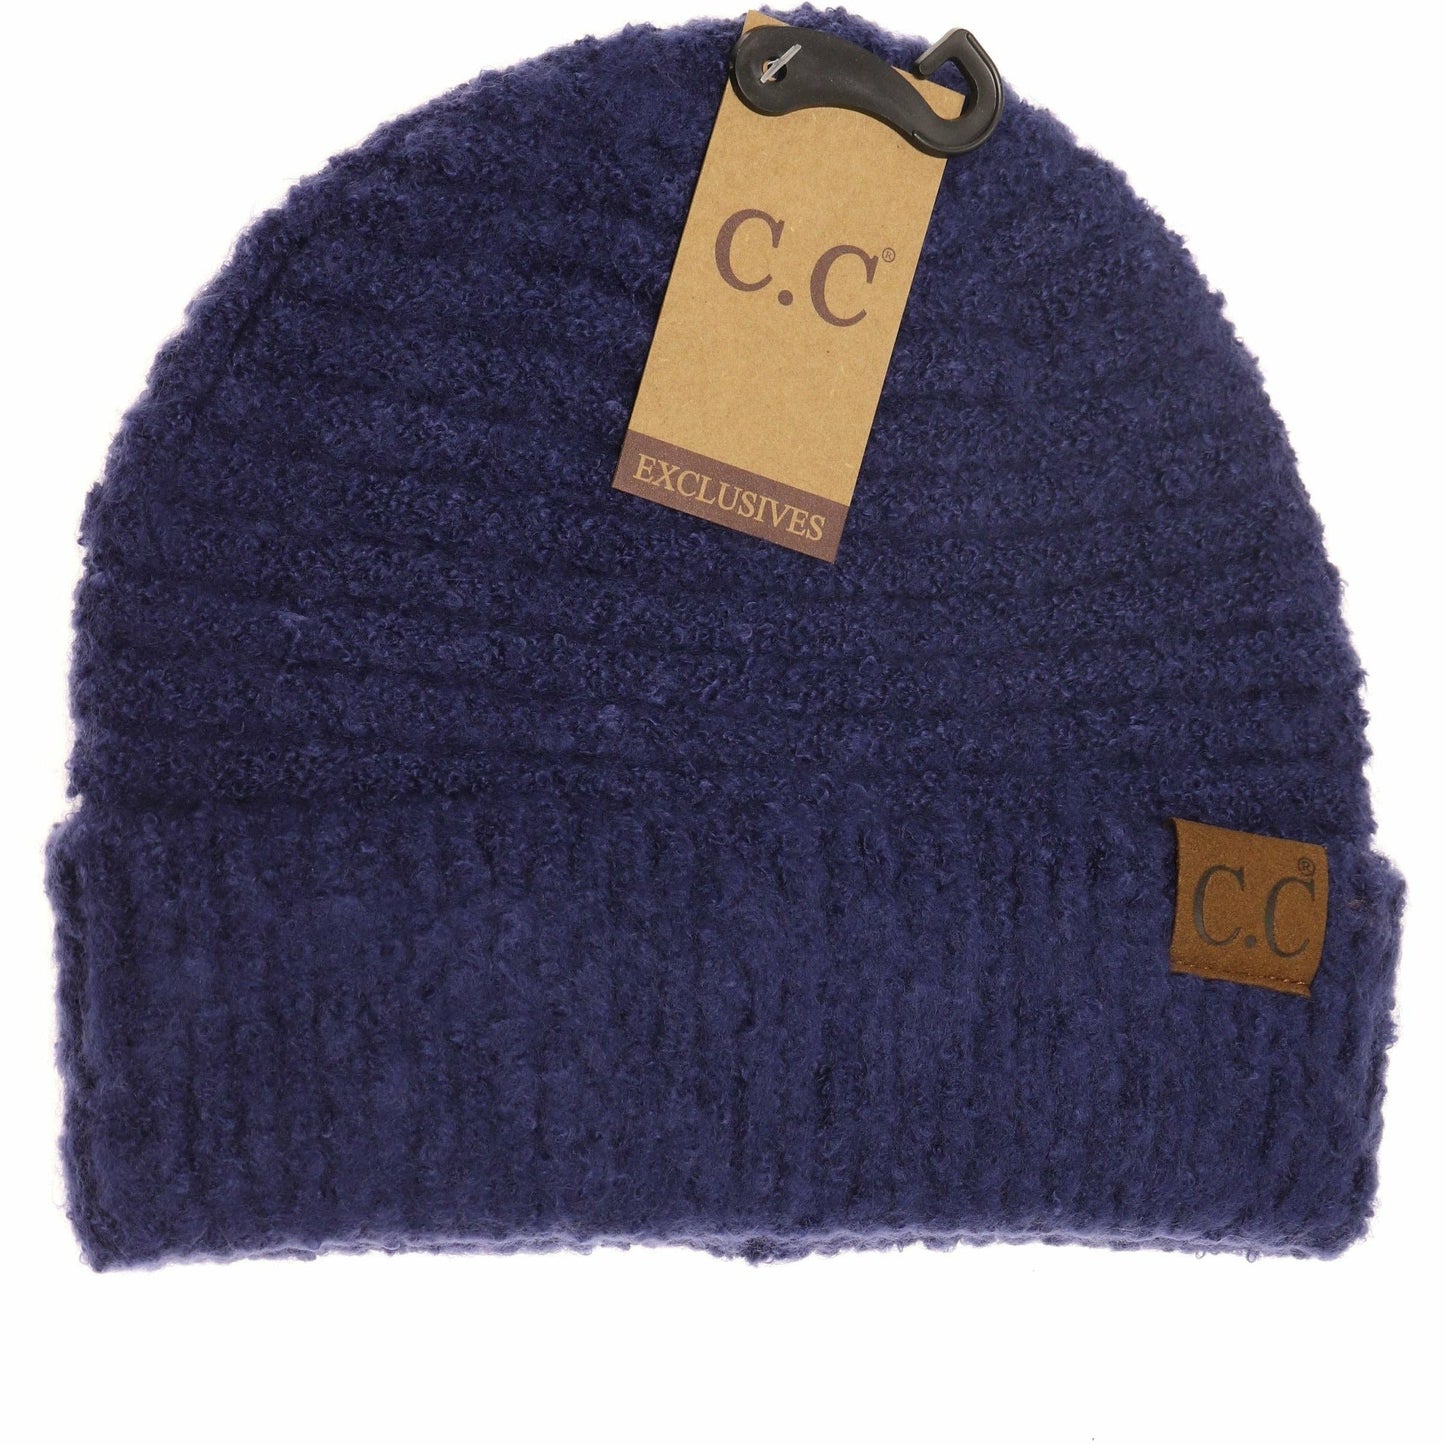 Load image into Gallery viewer, Solid Boucle Knit Cuff CC Beanie HAT7006: Evening Blue
